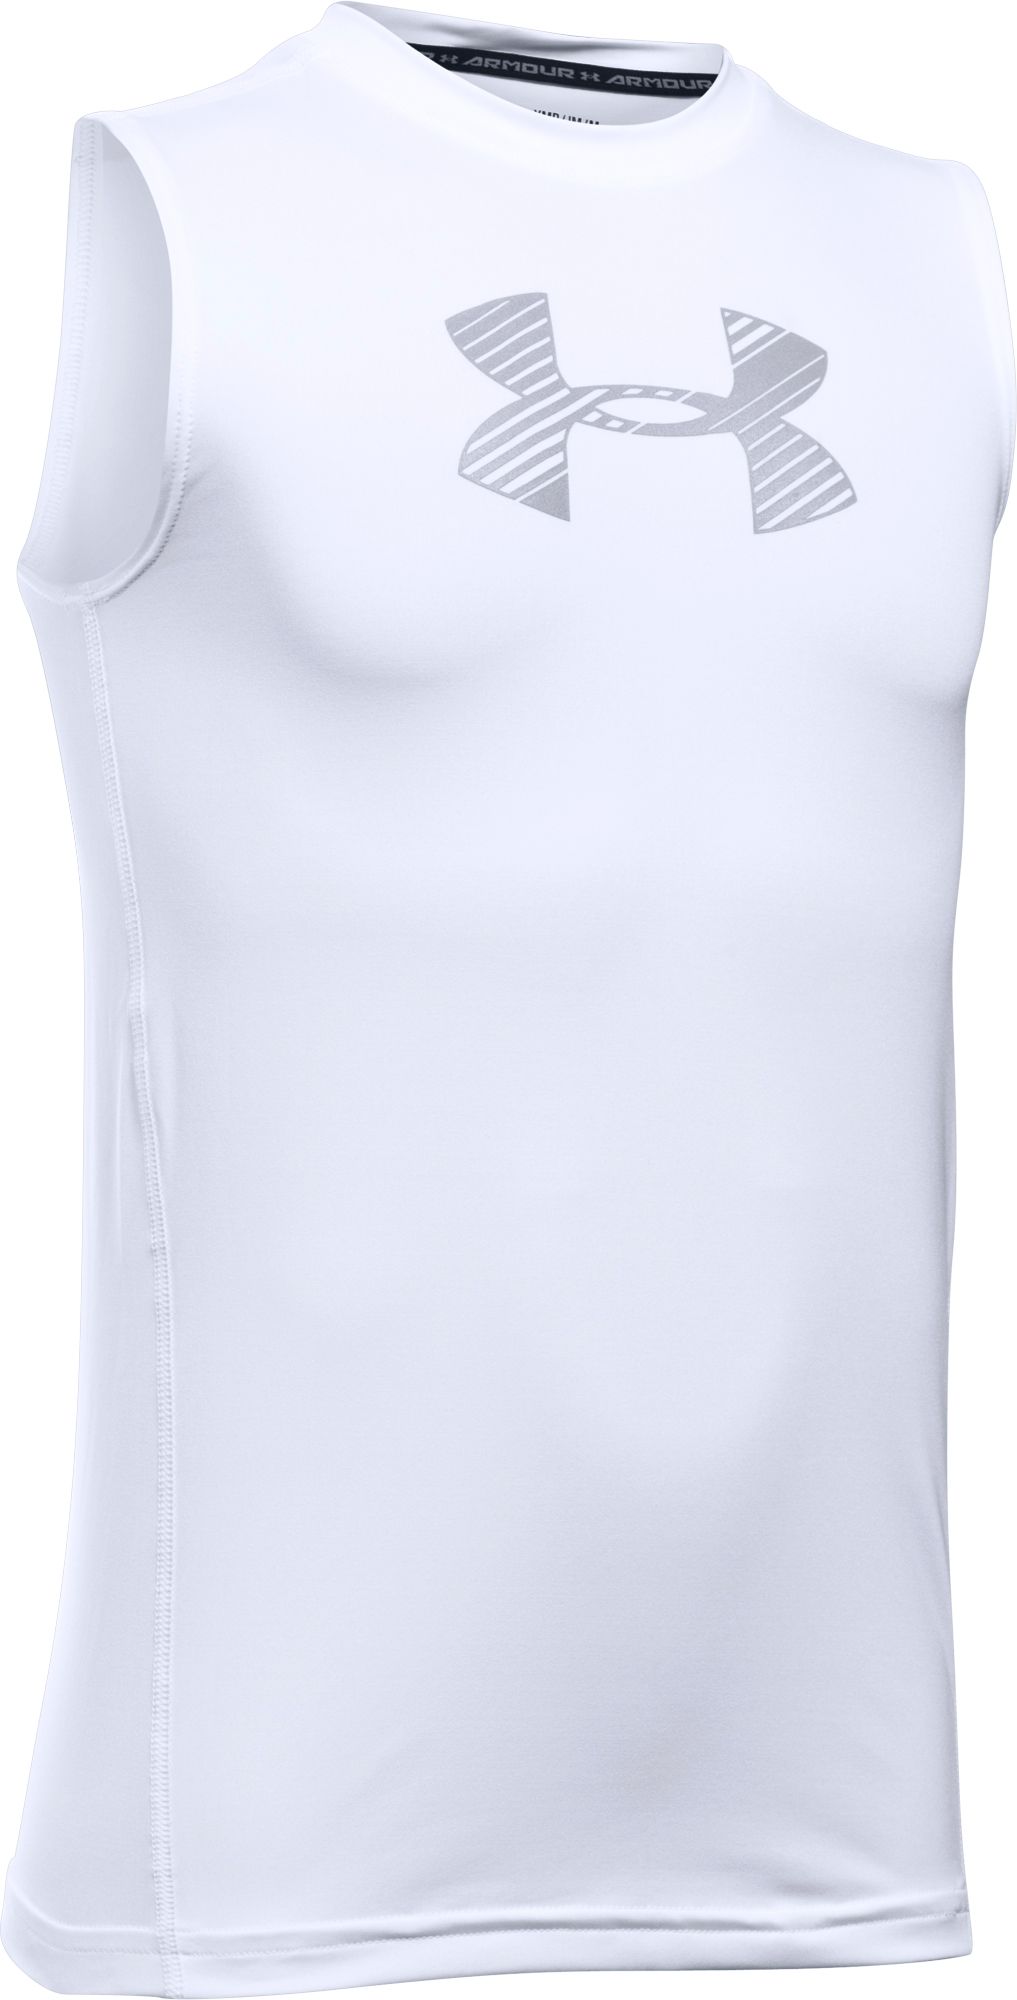 under armour youth sleeveless compression shirt